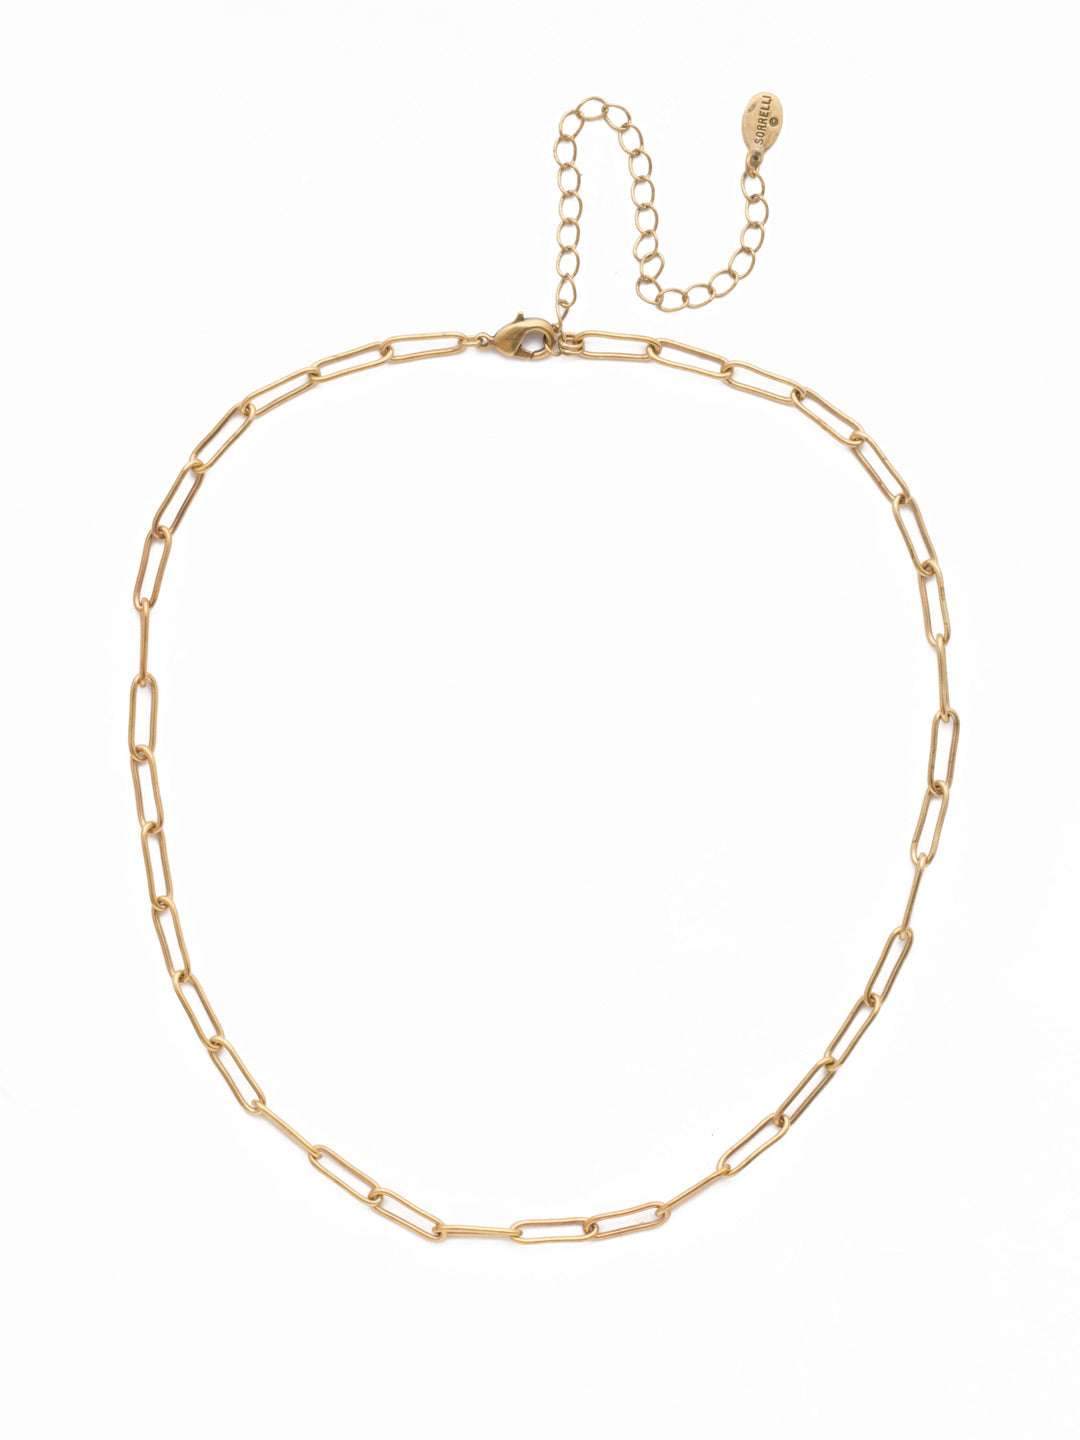 Jacinda Tennis Necklace - 4NES13AGCRY - <p>The Jacinda Tennis Necklace is our take on the paperclip link trend. It's a simple stunner you can wear for years and years to come. From Sorrelli's Crystal collection in our Antique Gold-tone finish.</p>